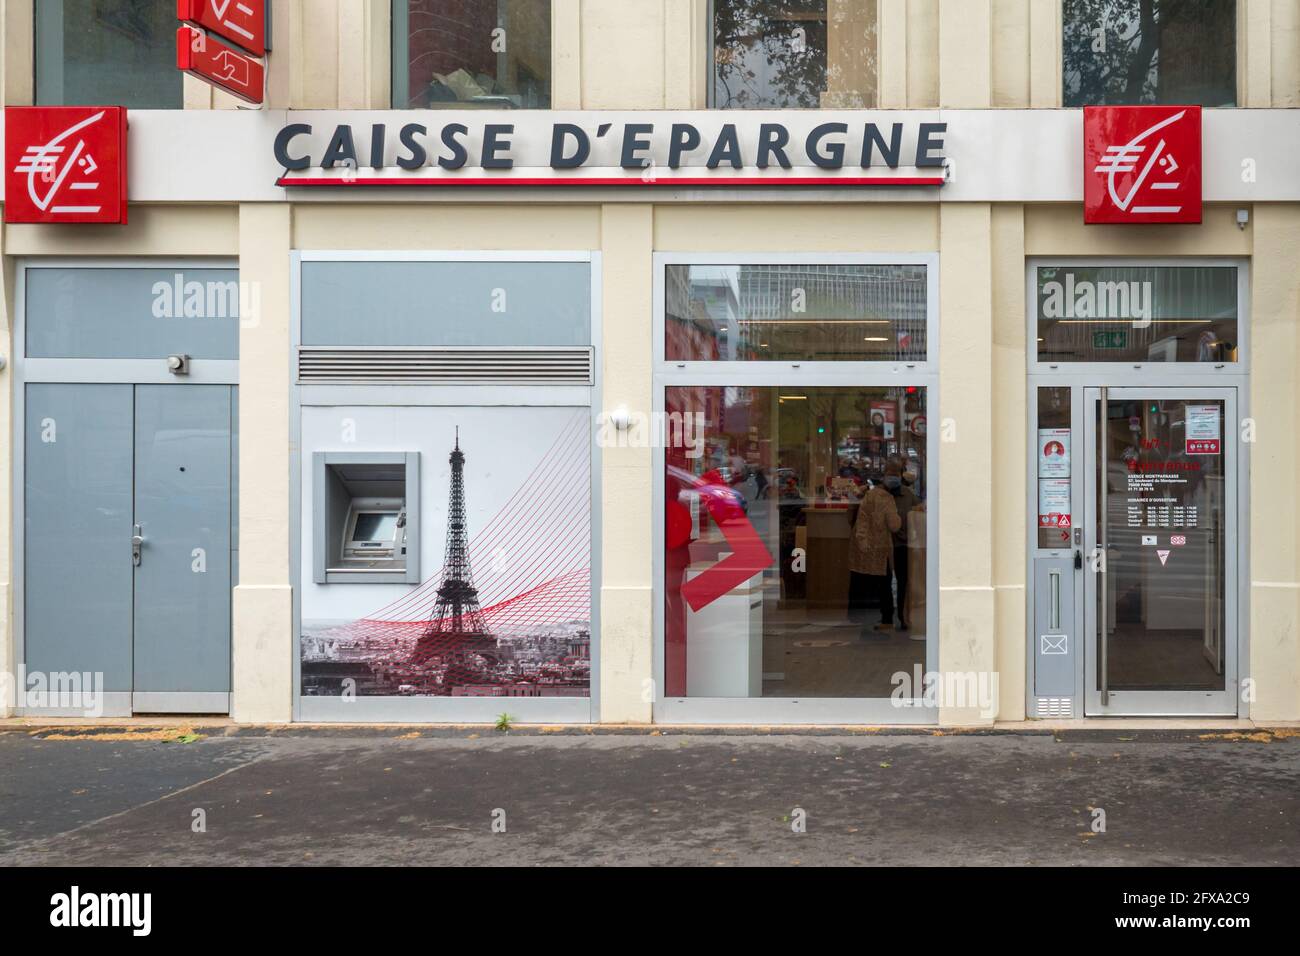 CAISSE D'EPARGNE Bank Front Store Facade of french Shop with Logo Signage  in Fleche, France 20.5.2021 CAISSE D'EPARGNE Bank is famous brand for  saving Stock Photo - Alamy